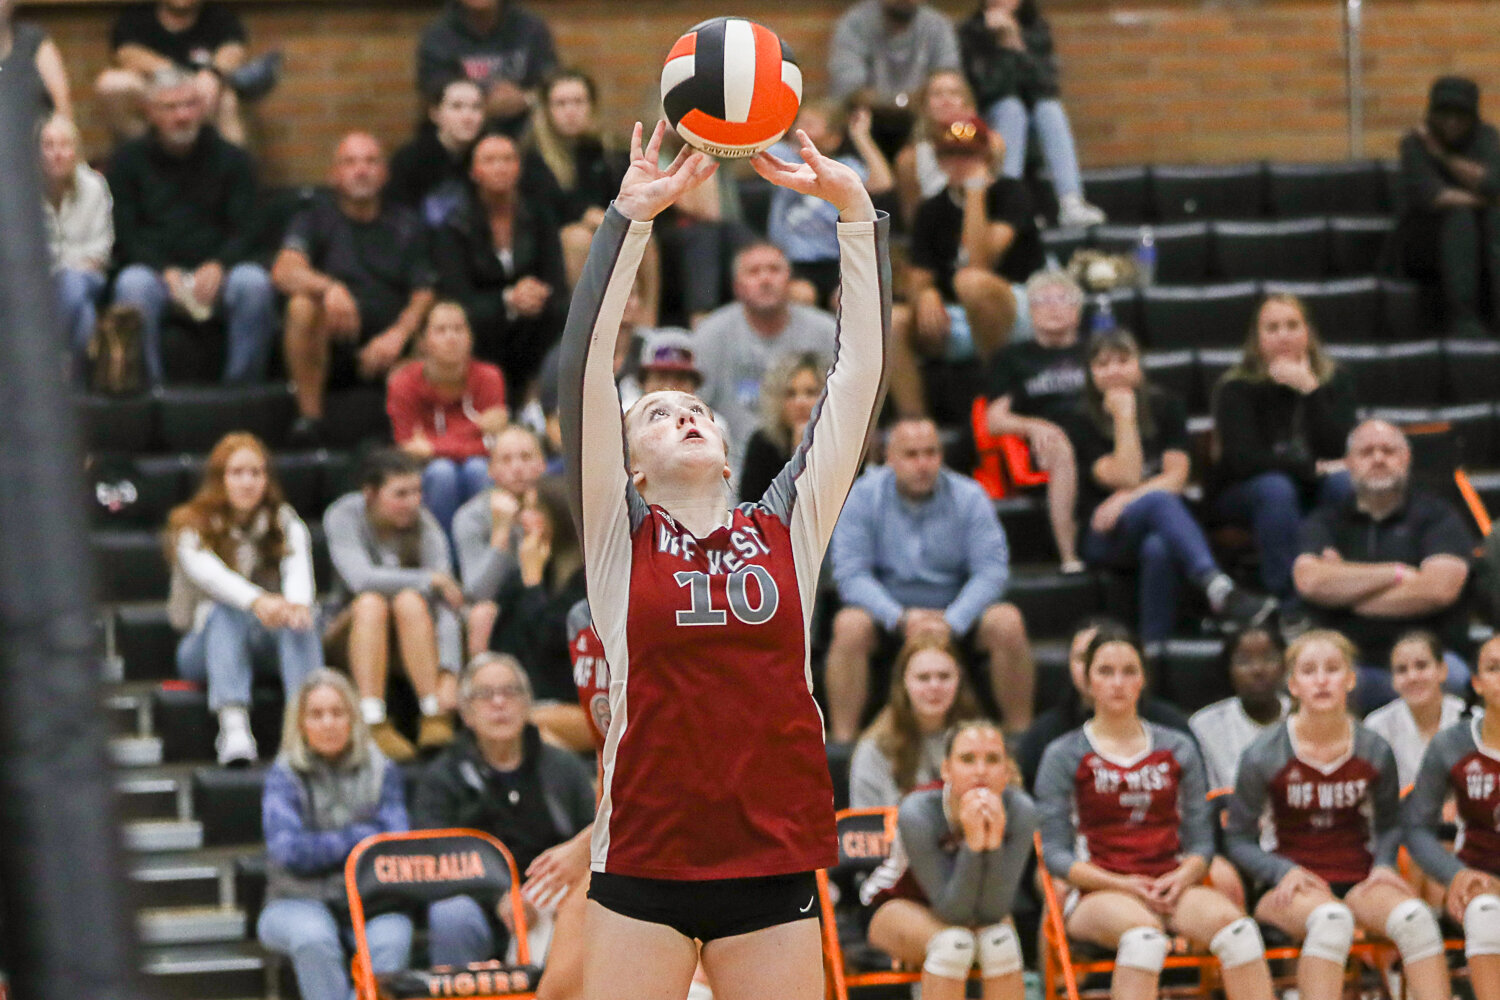 Ashley Mueller sets the ball during the first set of W.F. West's loss at Centralia on Sept. 21.